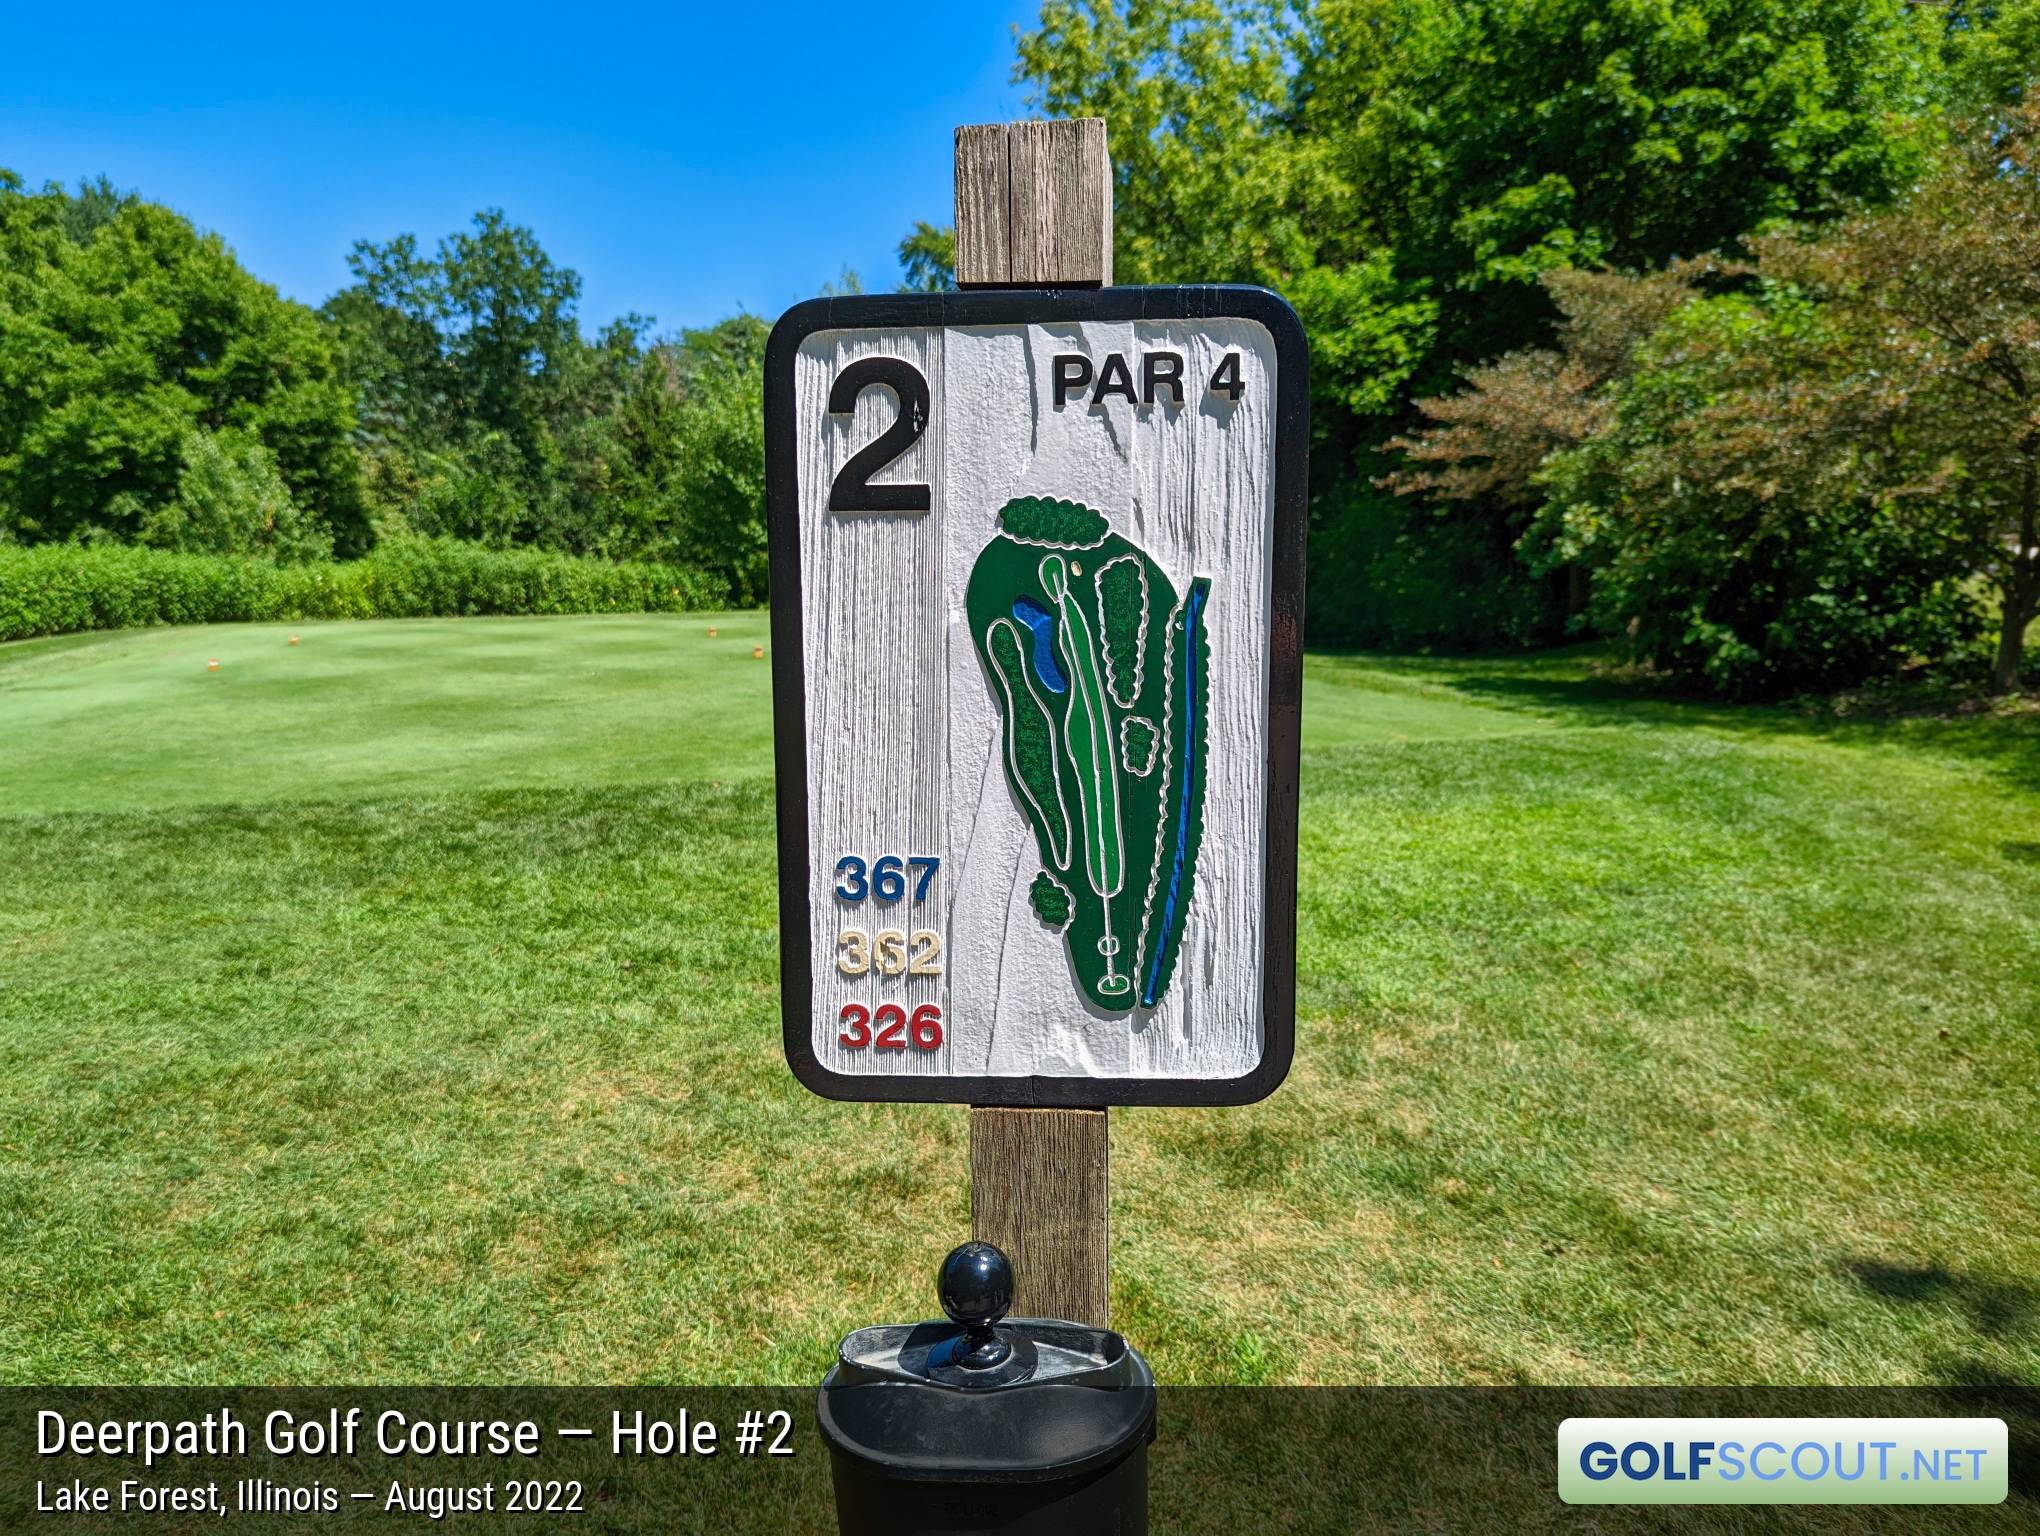 Photo of hole #2 at Deerpath Golf Course in Lake Forest, Illinois. 